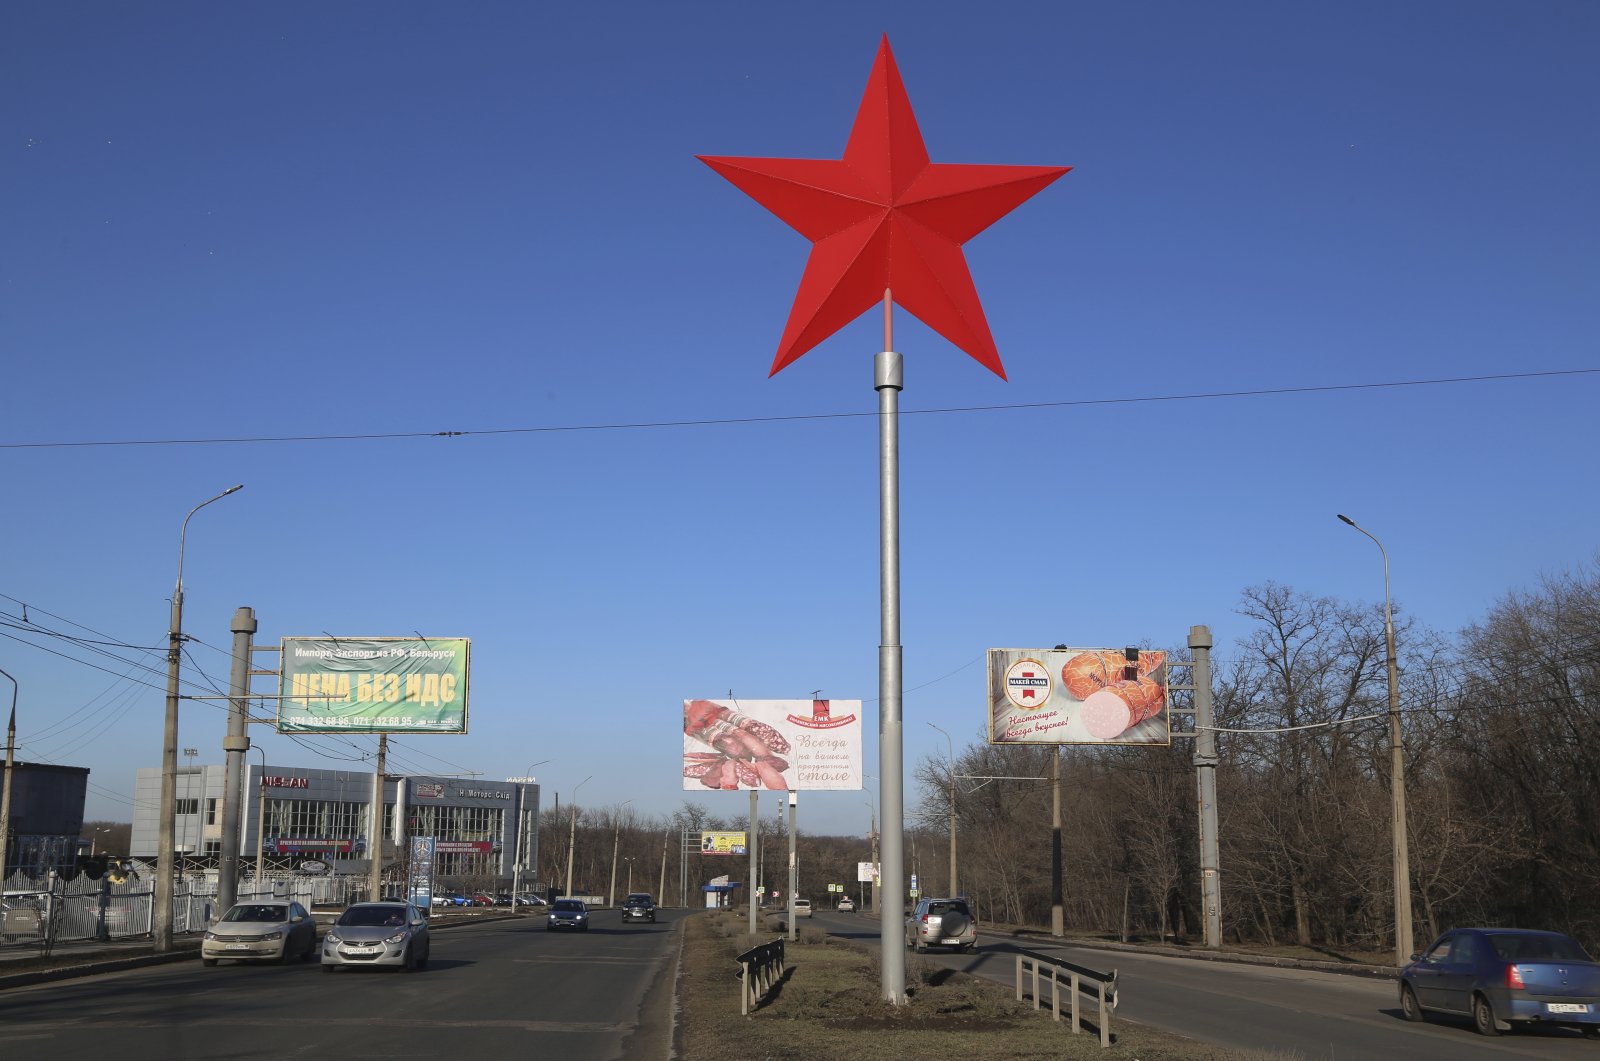 A huge red star rises over a street in Donetsk, the territory controlled by pro-Russian militants, eastern Ukraine, Monday, Feb. 14, 2022. (AP Photo)